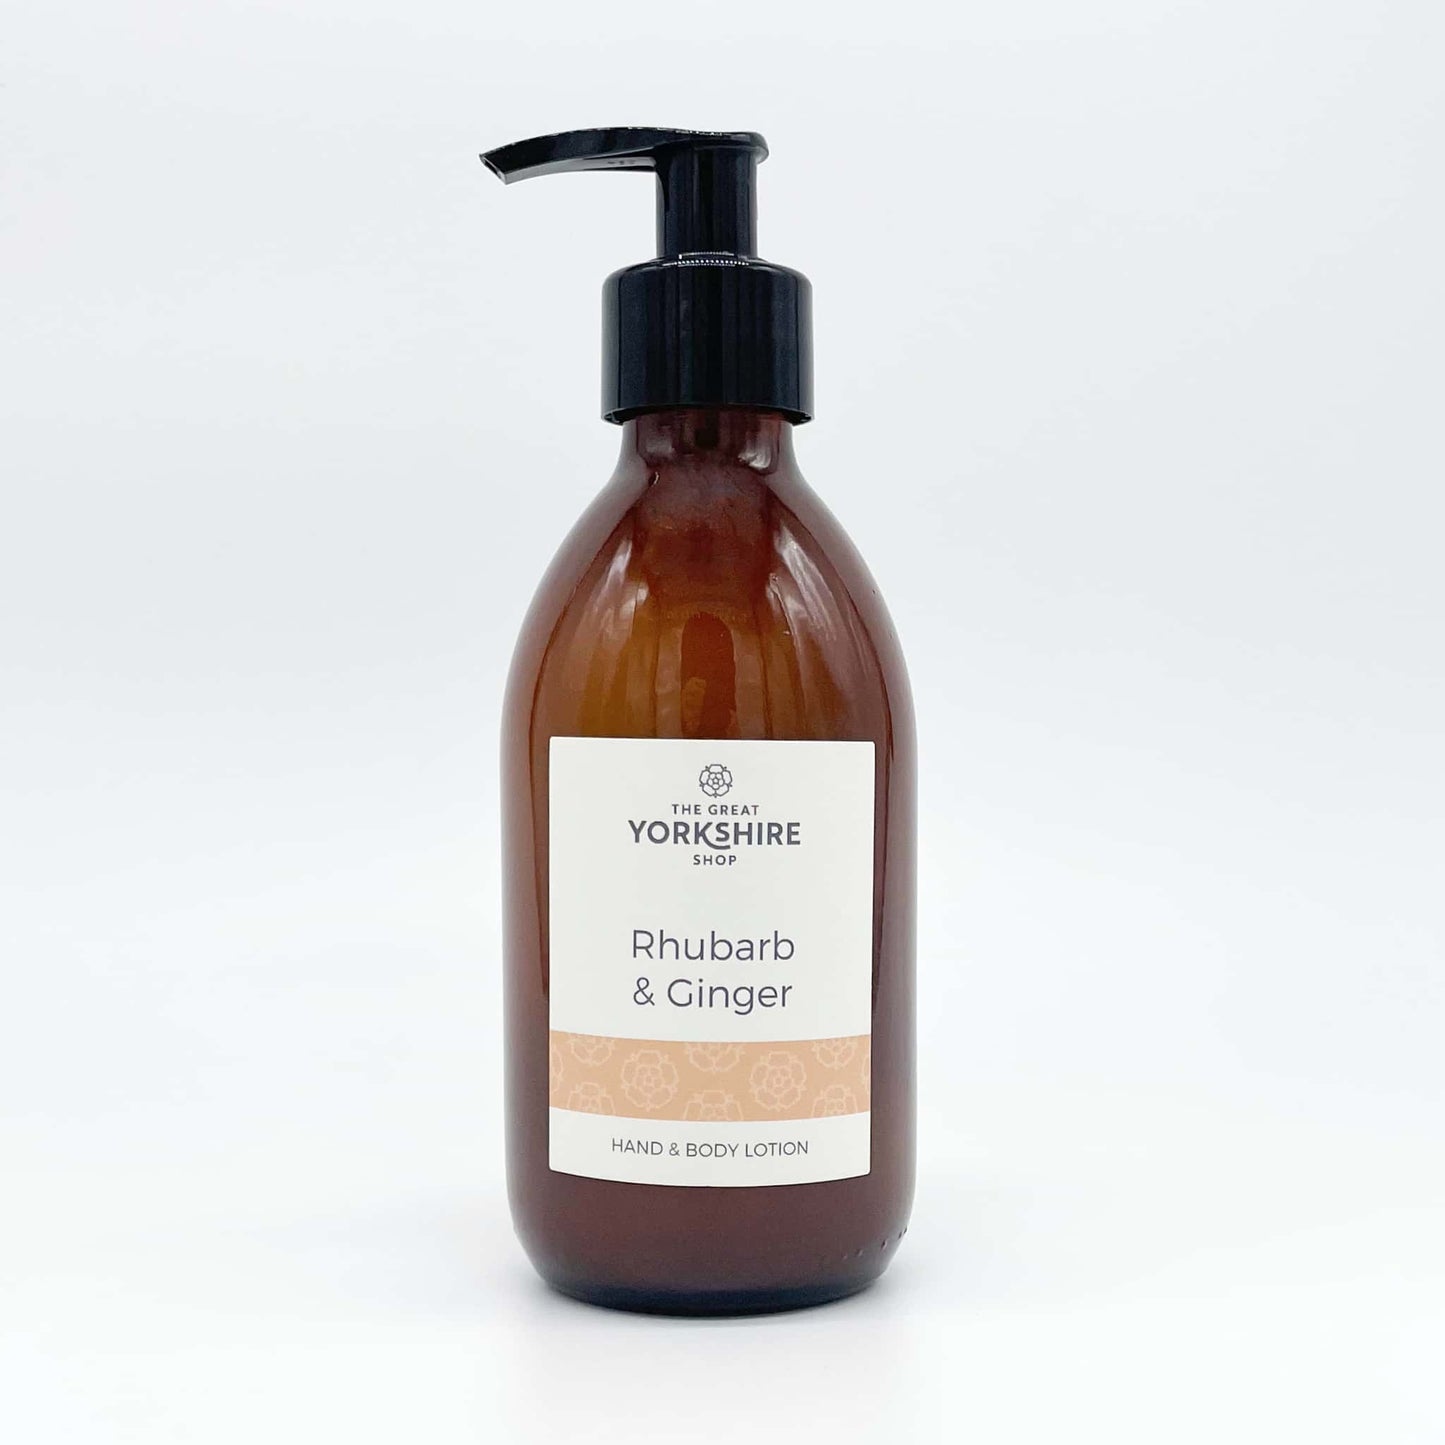 Rhubarb & Ginger Hand & Body Lotion - The Great Yorkshire Shop